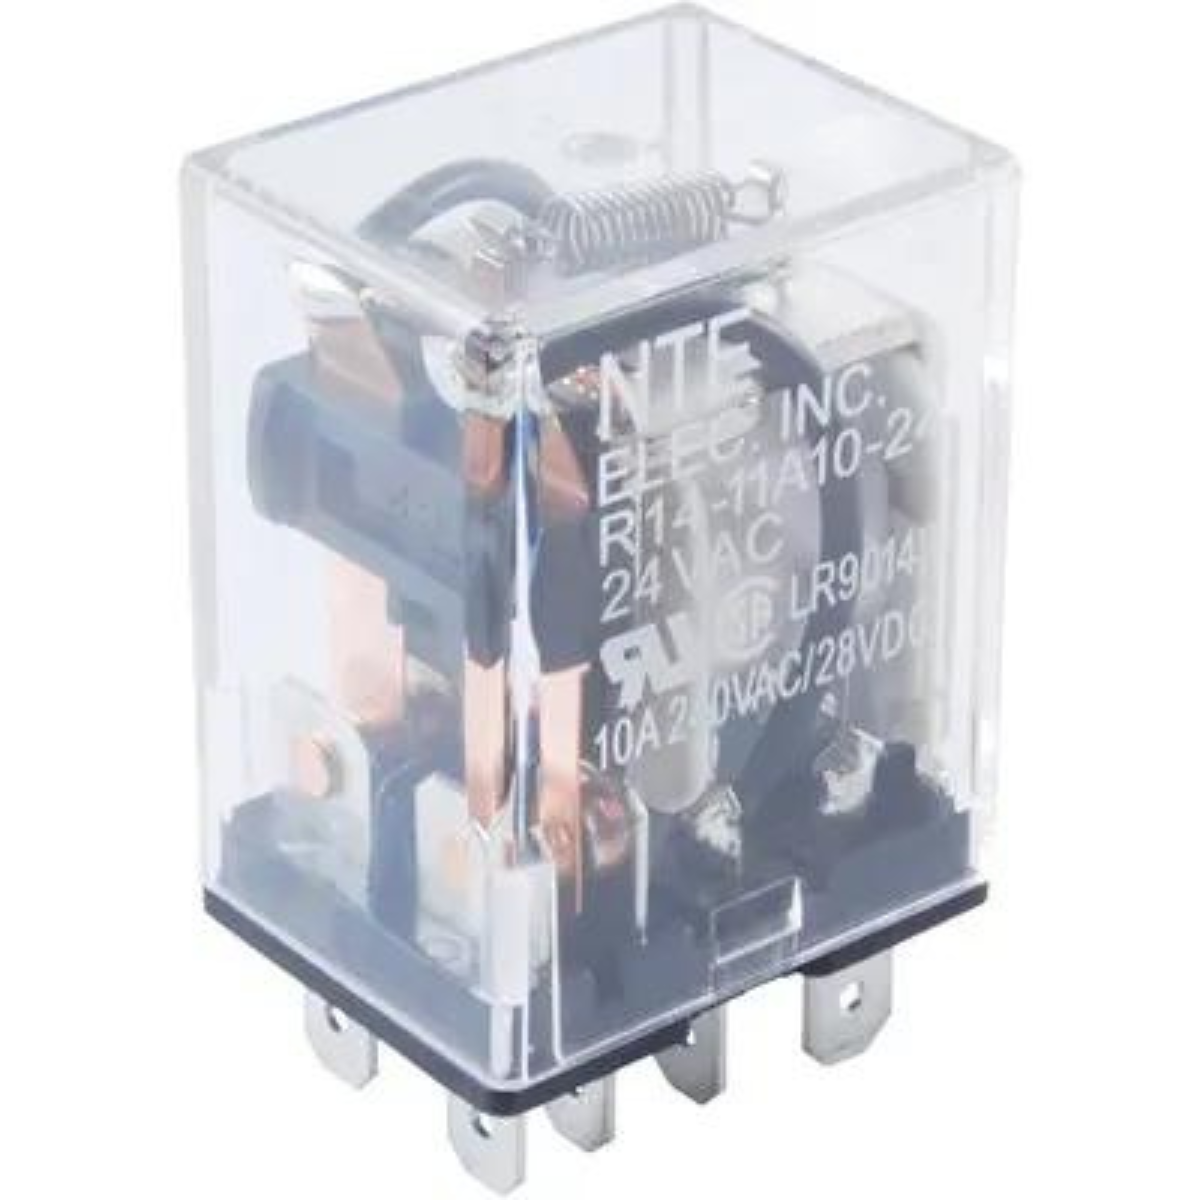 "High-Performance 10A 24VDC 8 Pin Blade DPDT Relay for Industrial Use"